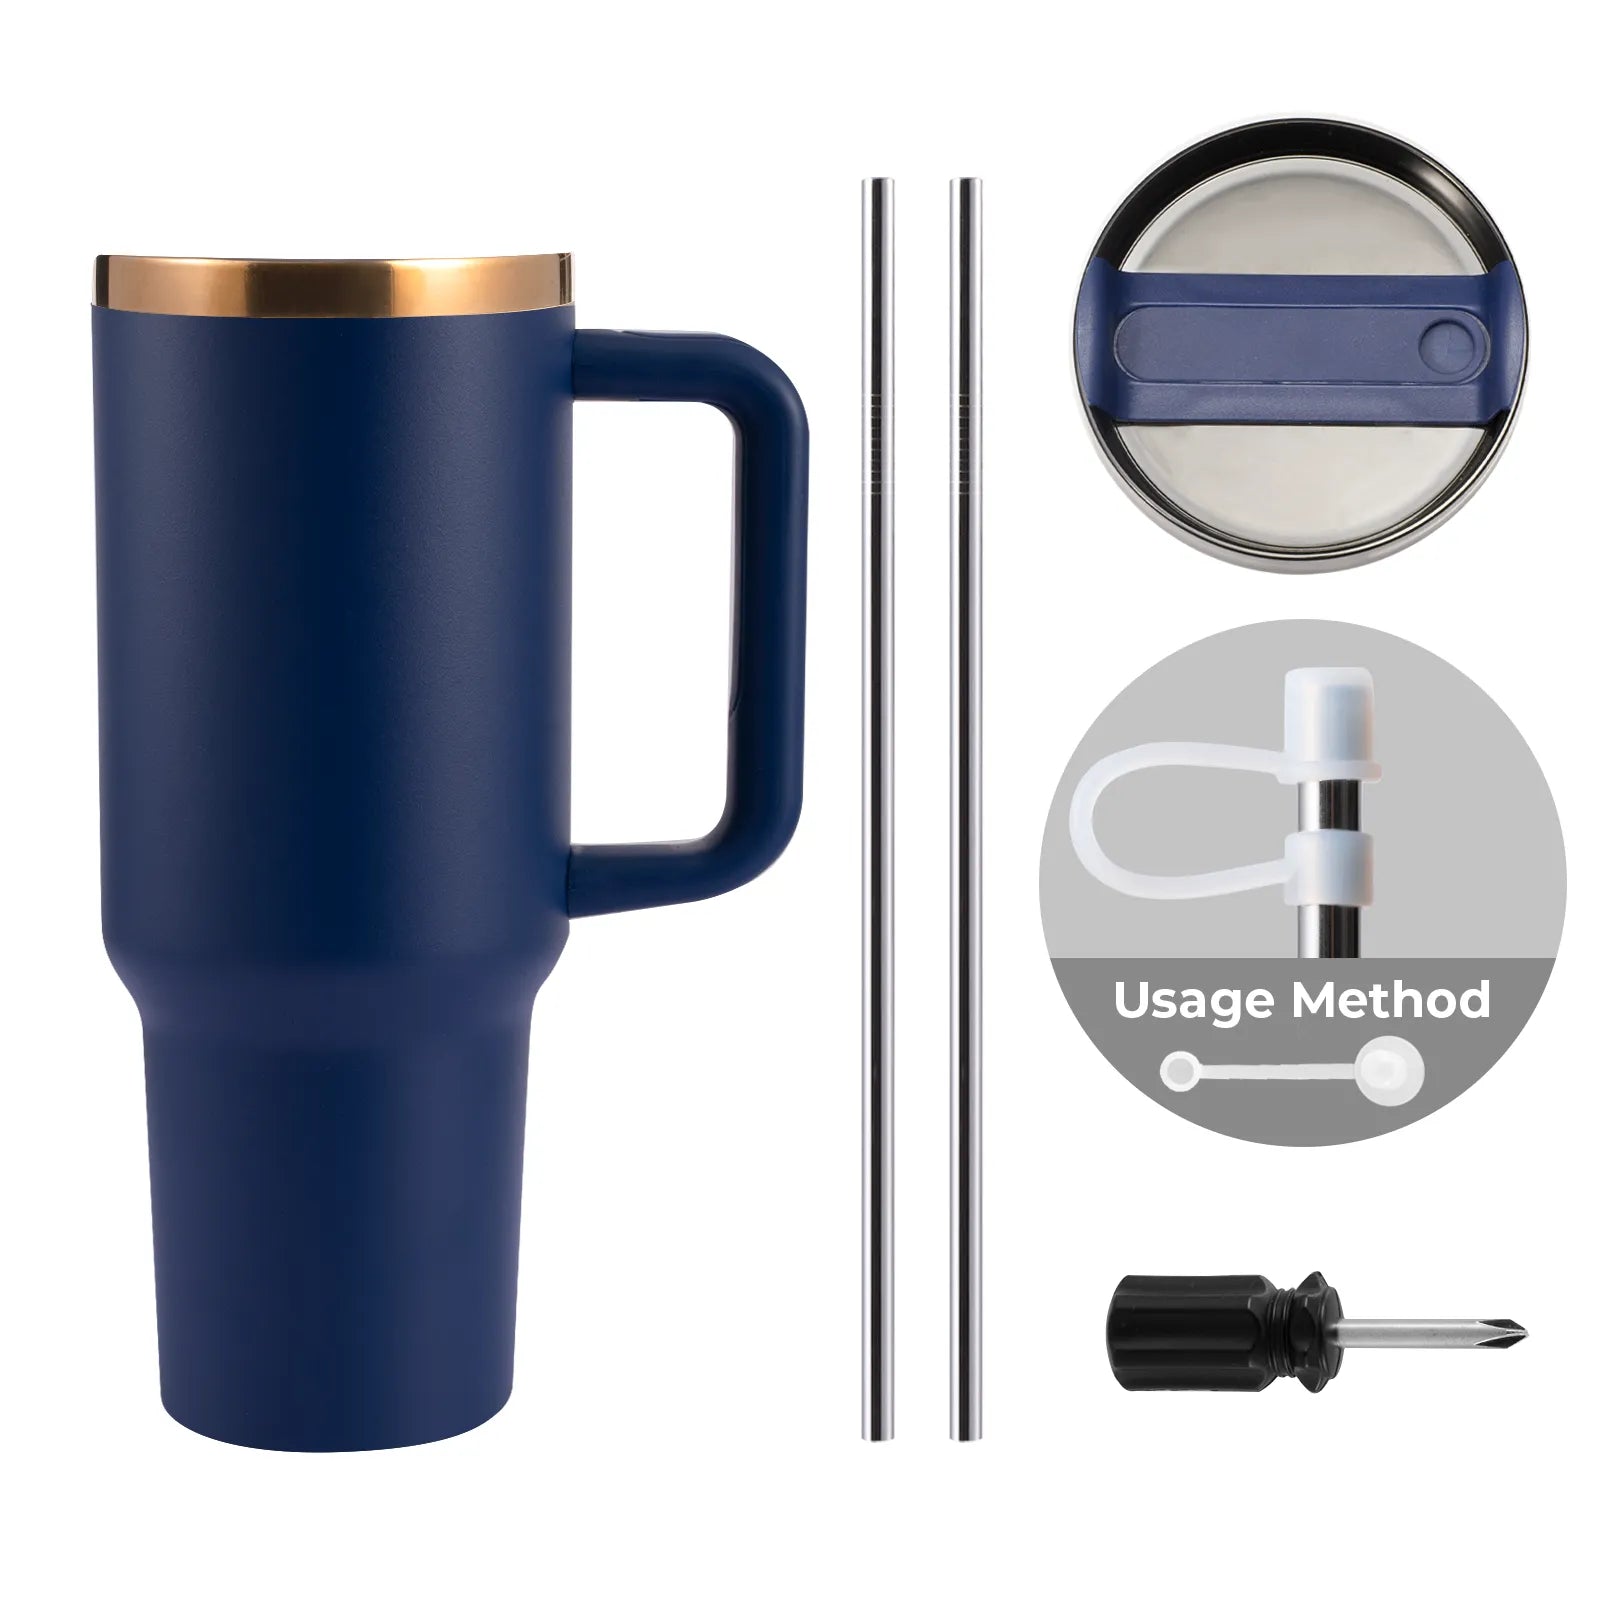 Navy to Gold Stainless Steel Tumbler with Removable Handle (40oz)